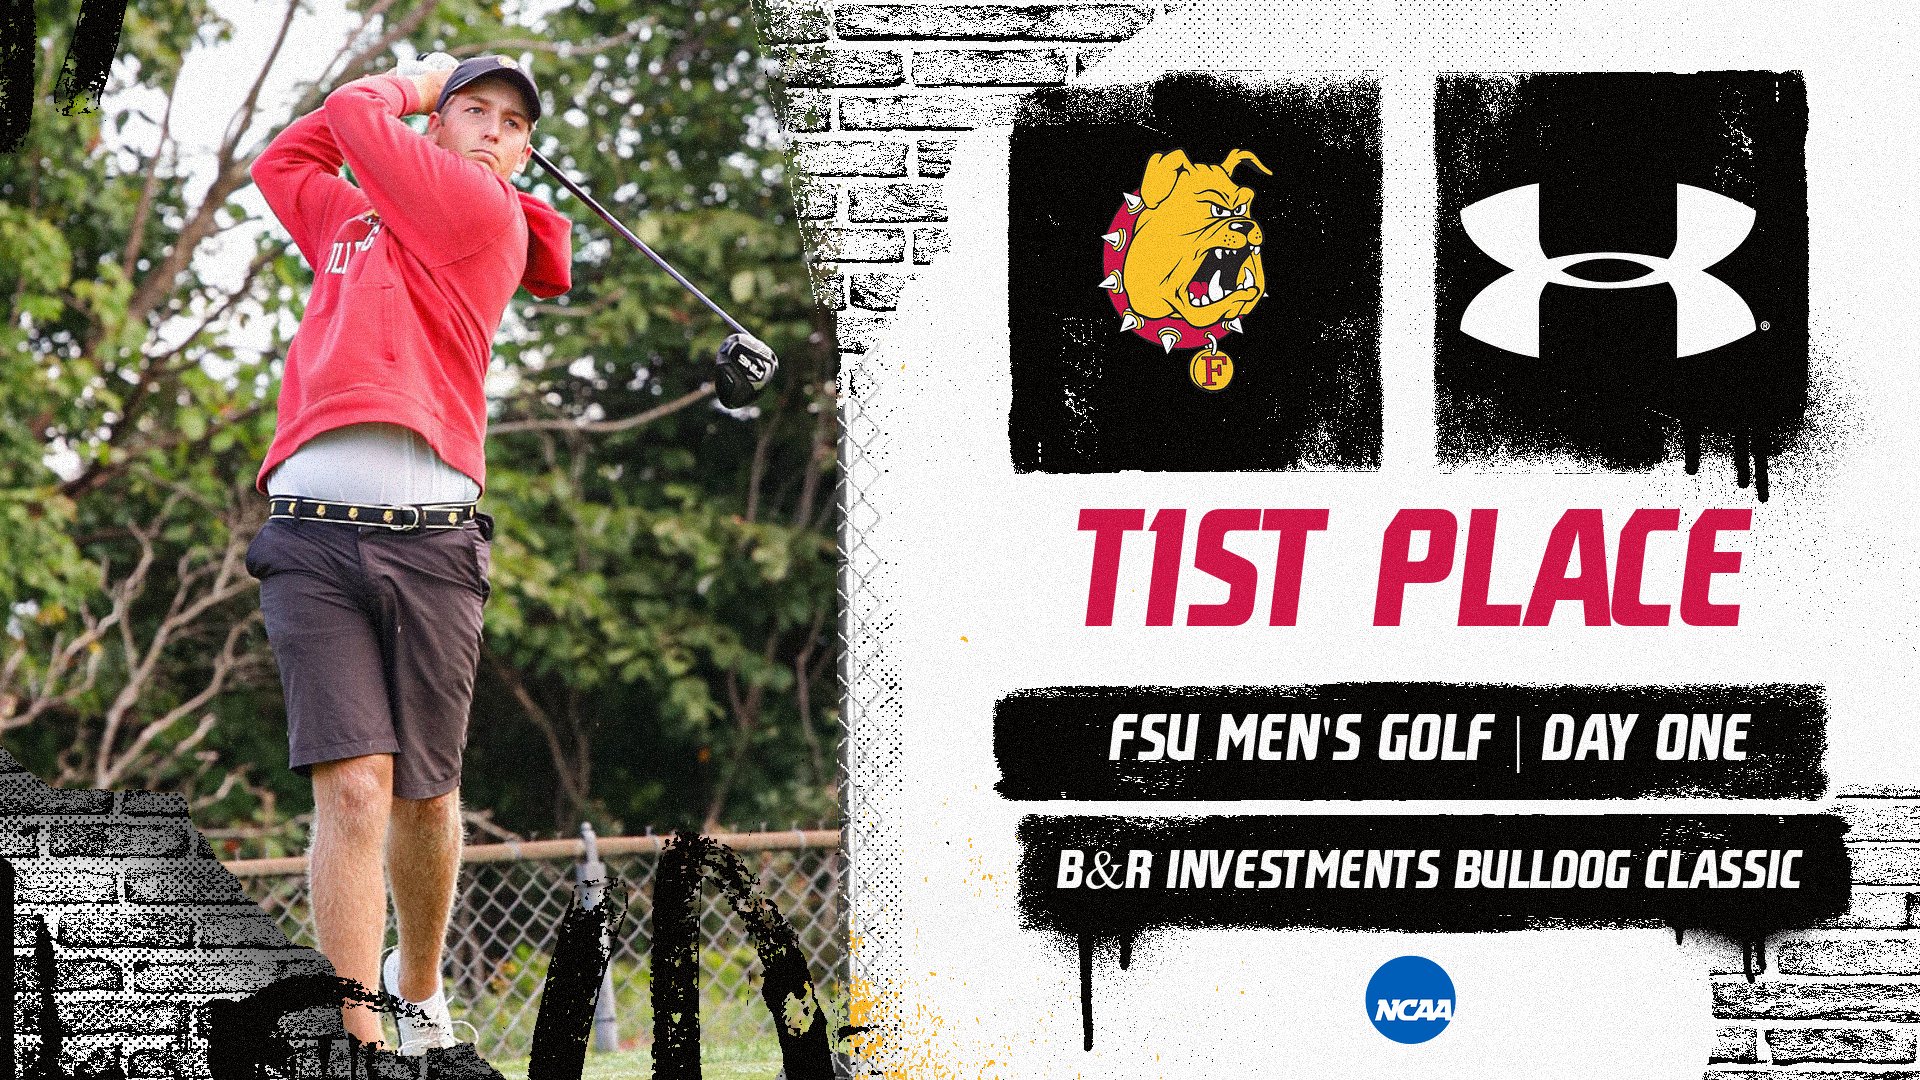 Ferris State Men's Golf Tied For 1st Place Overall Following First Two Rounds At Home Invite